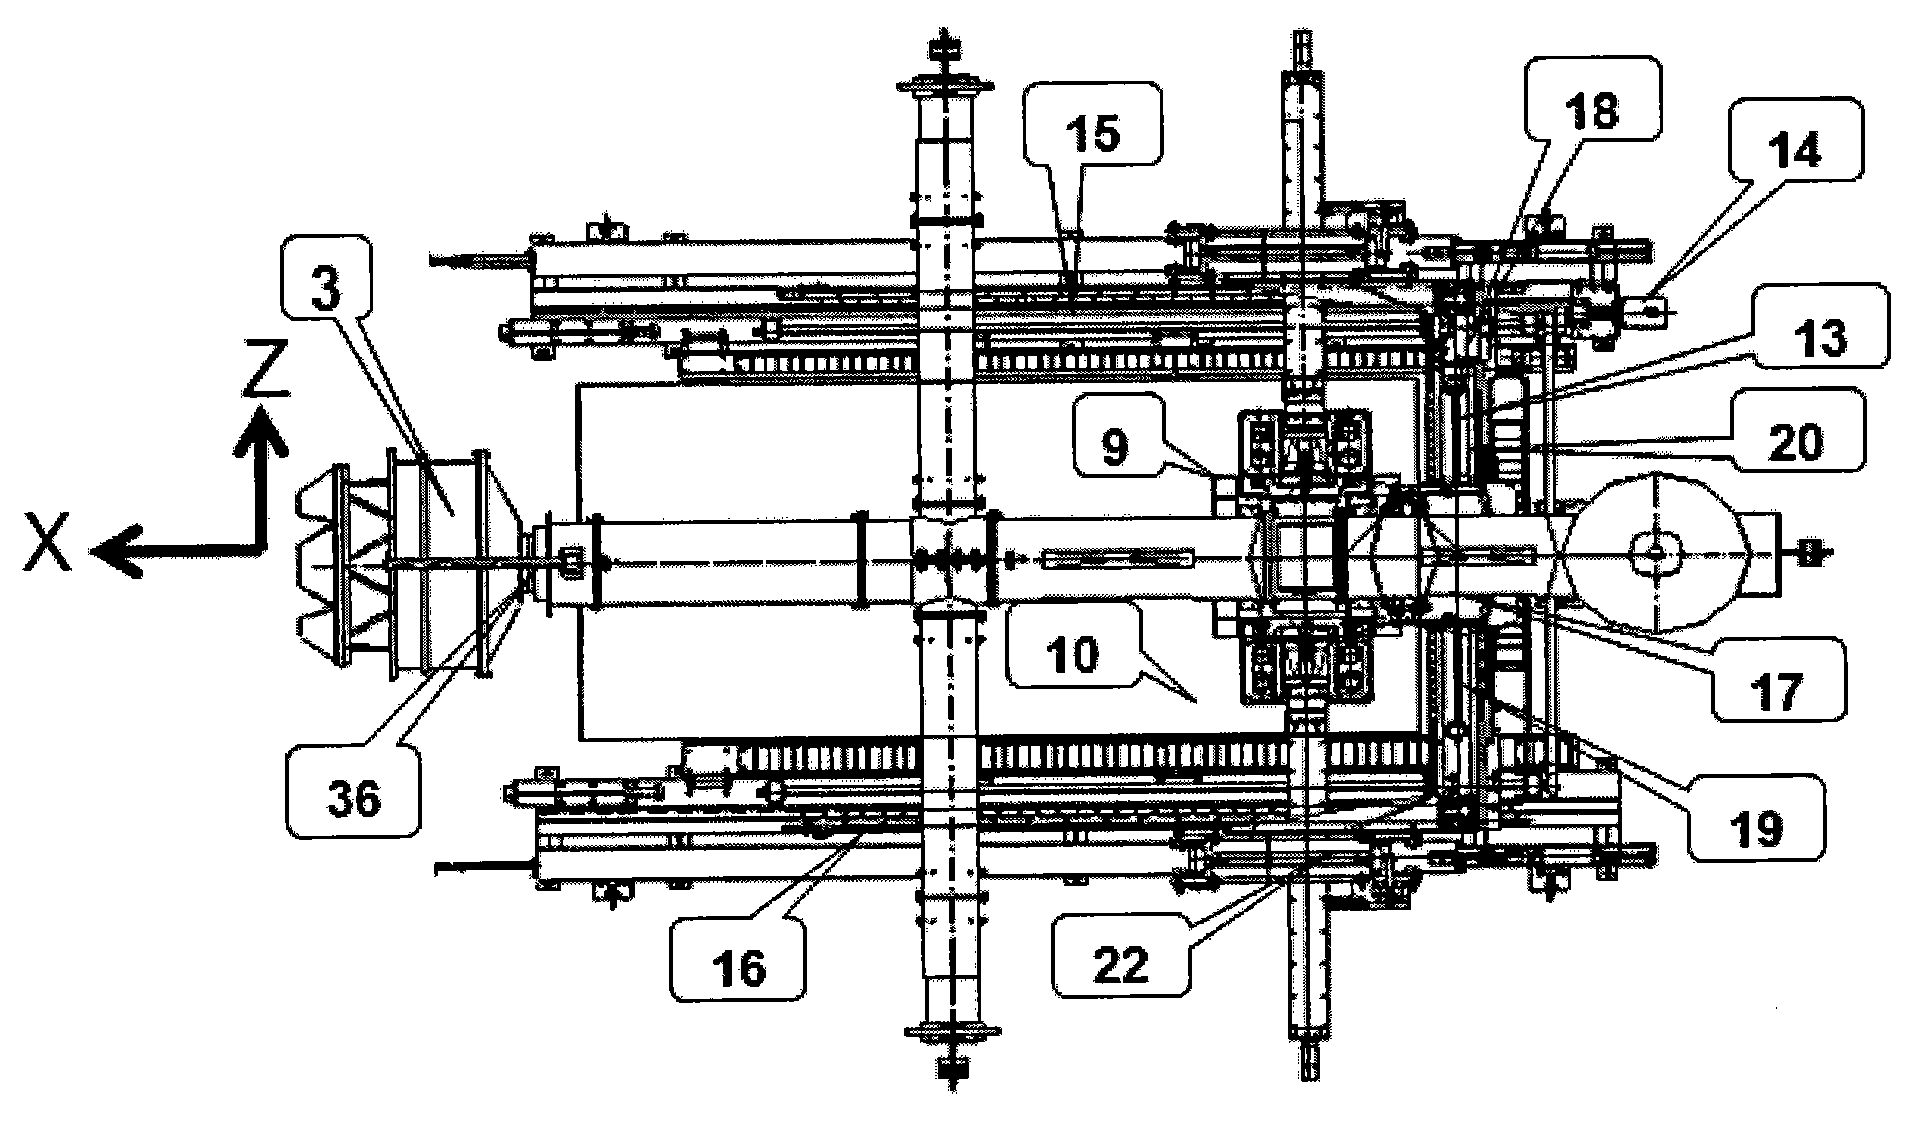 Buffer testbed of space docking mechanism